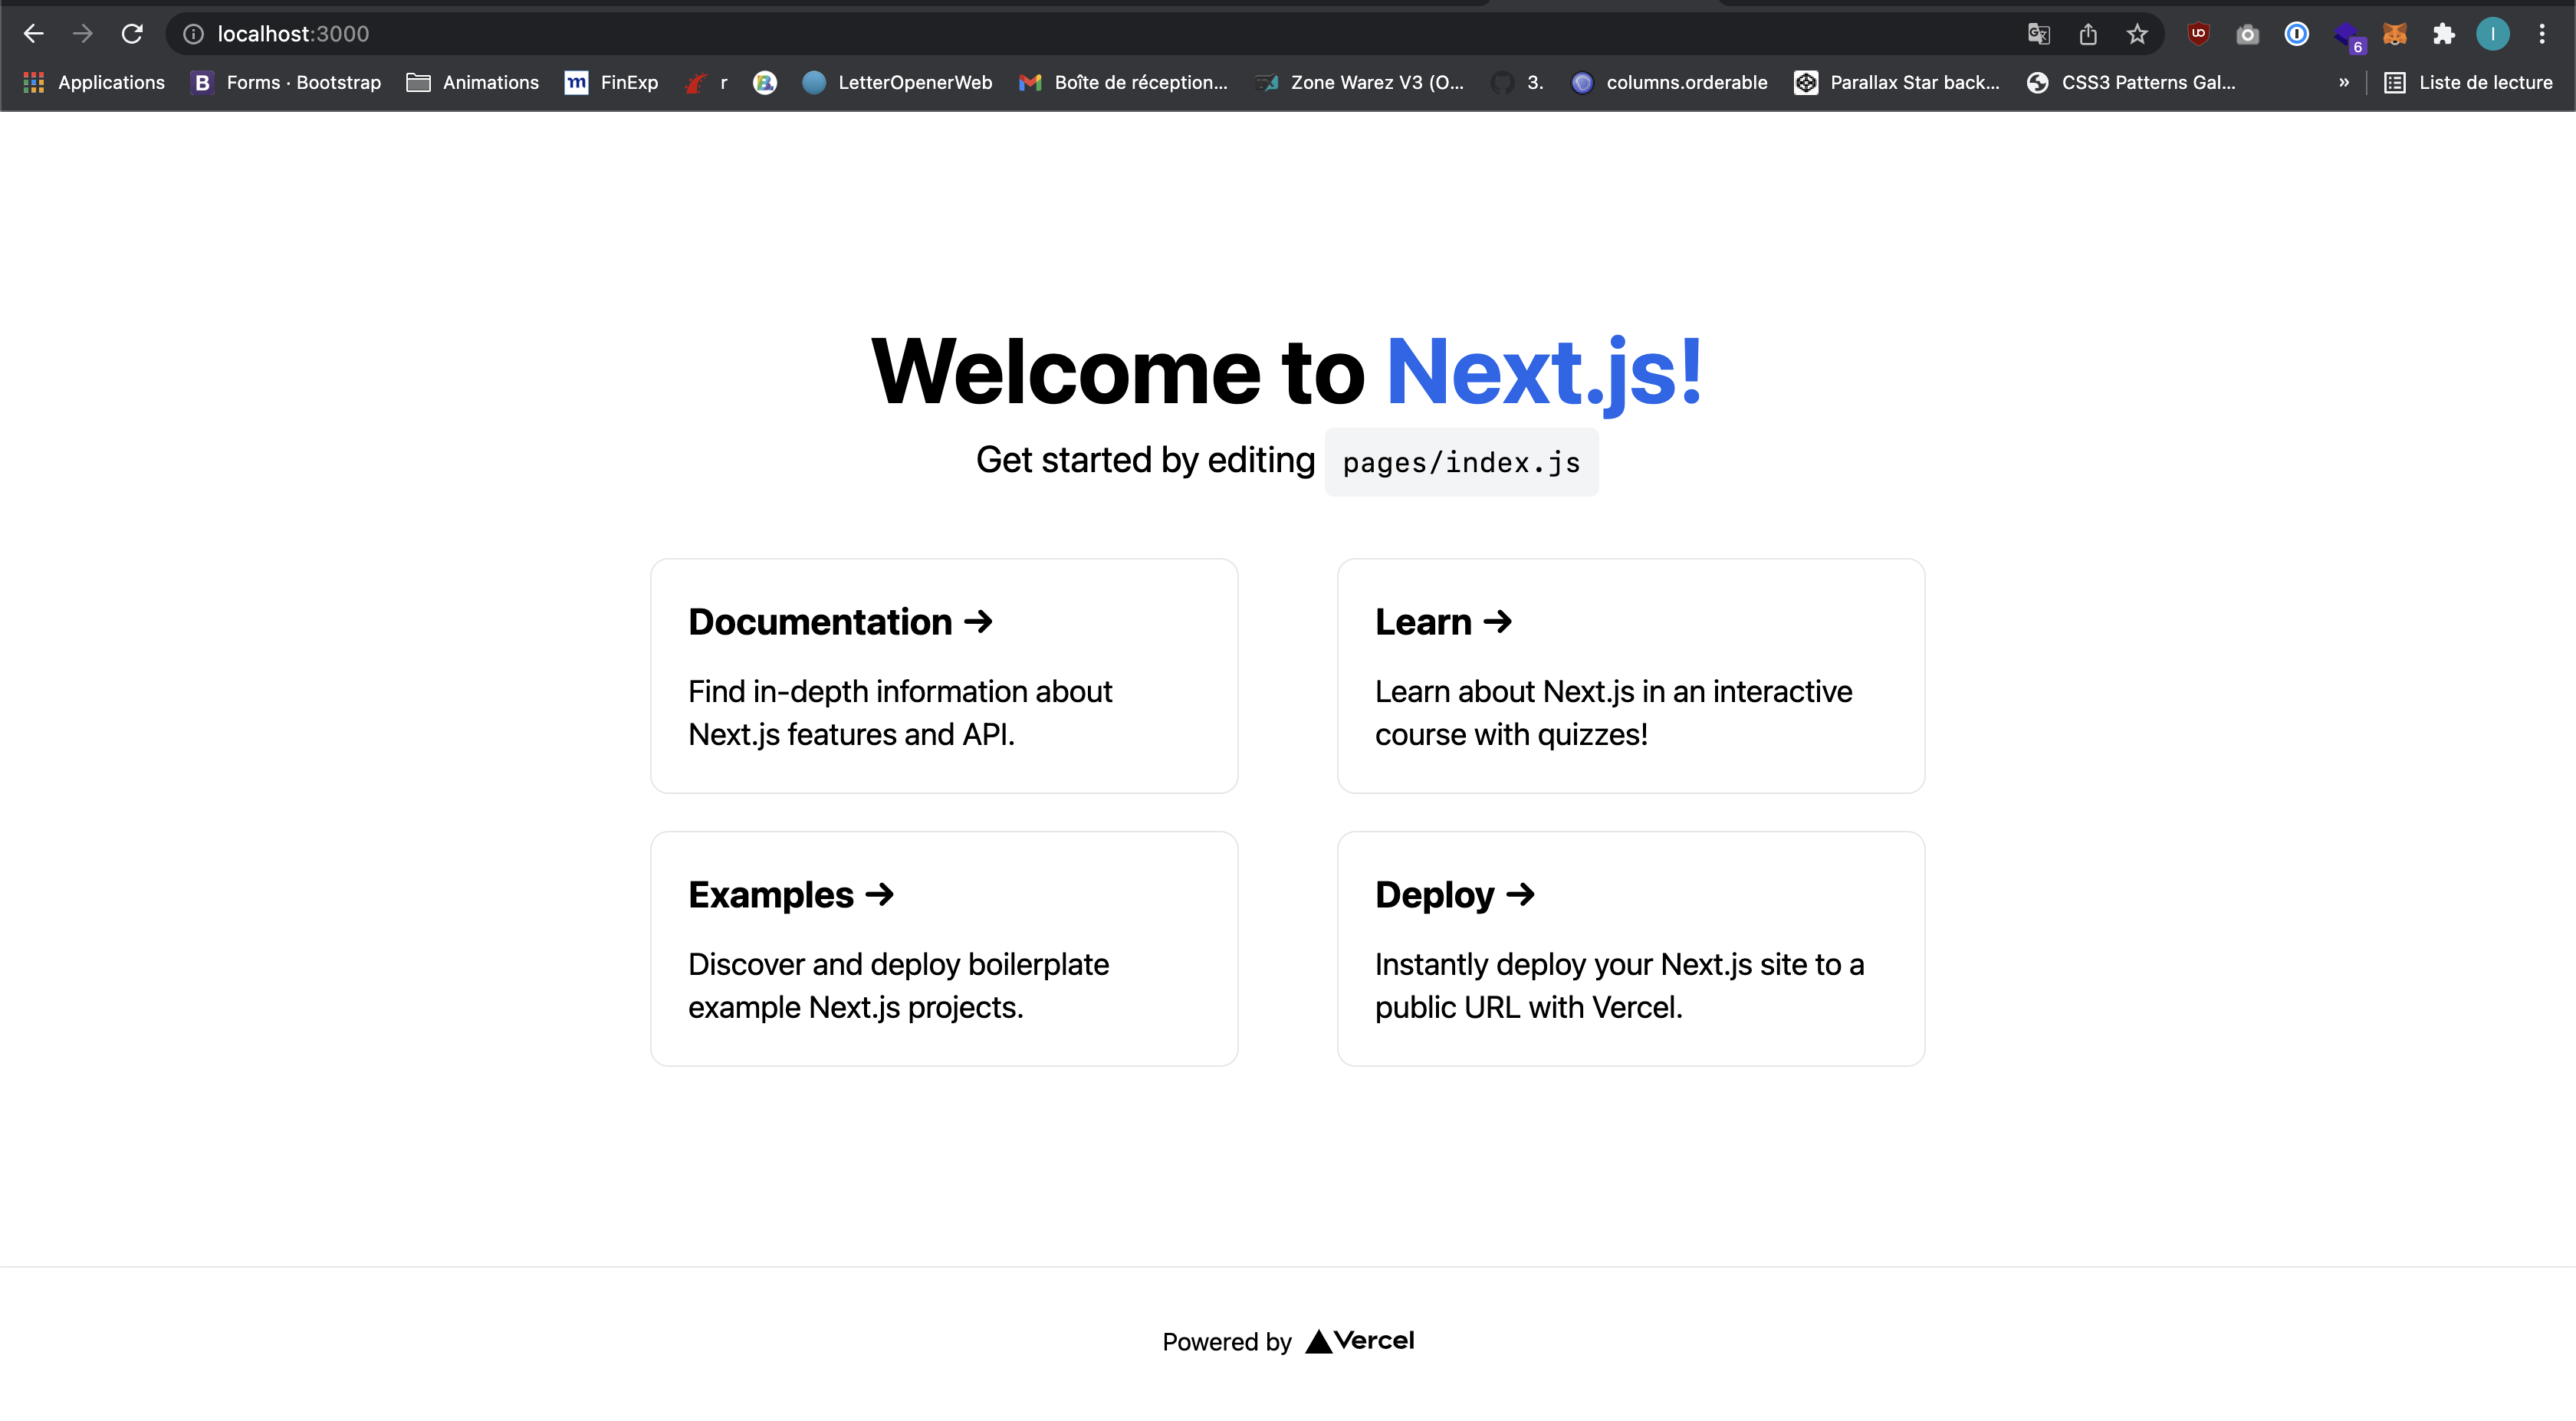 The default homepage of a new NextJs project